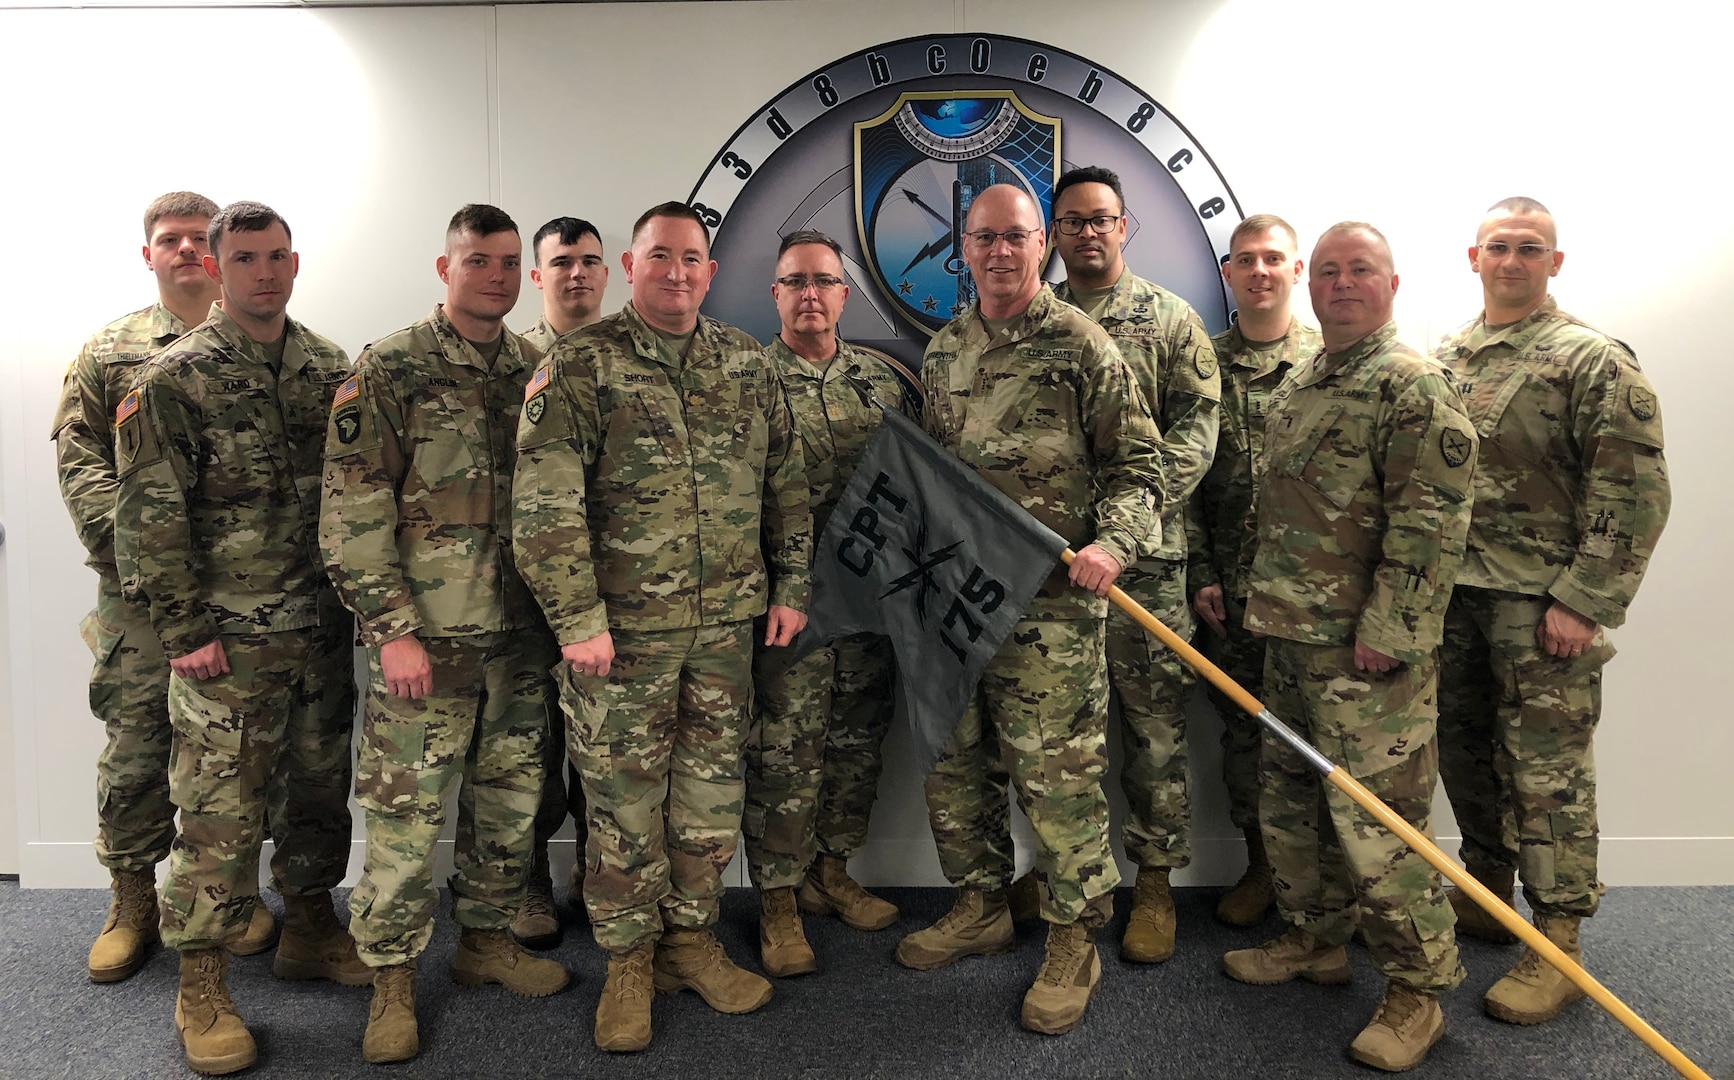 Members of the 175th Cyber Protection Team wrap up a year-long deployment to Fort Meade, Md., as part of Task Force Echo supporting cyberspace operations for U.S. Cyber Command.